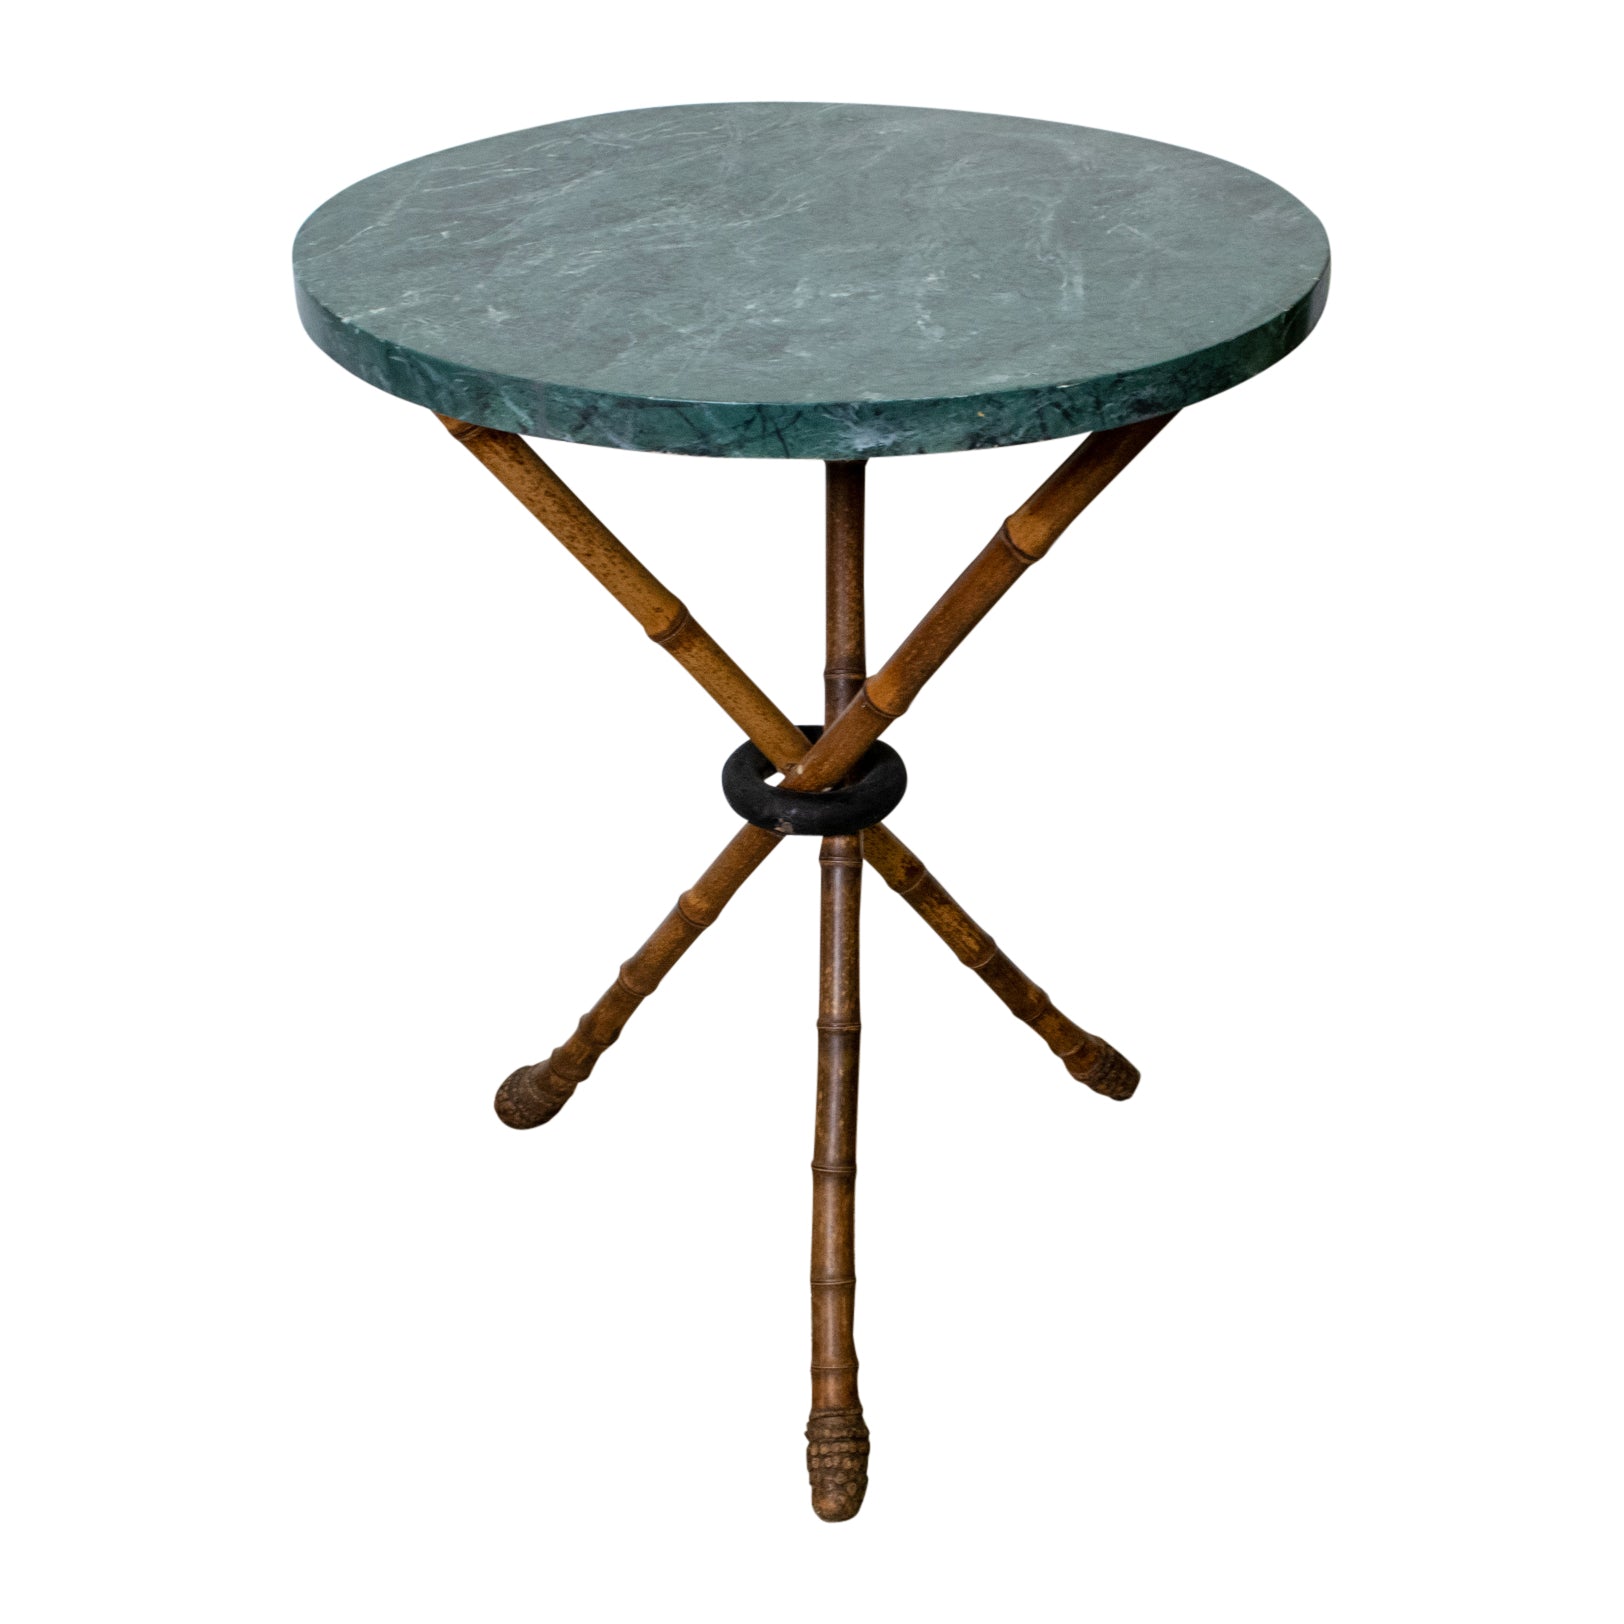 Empire style side table with Faux Marble Top